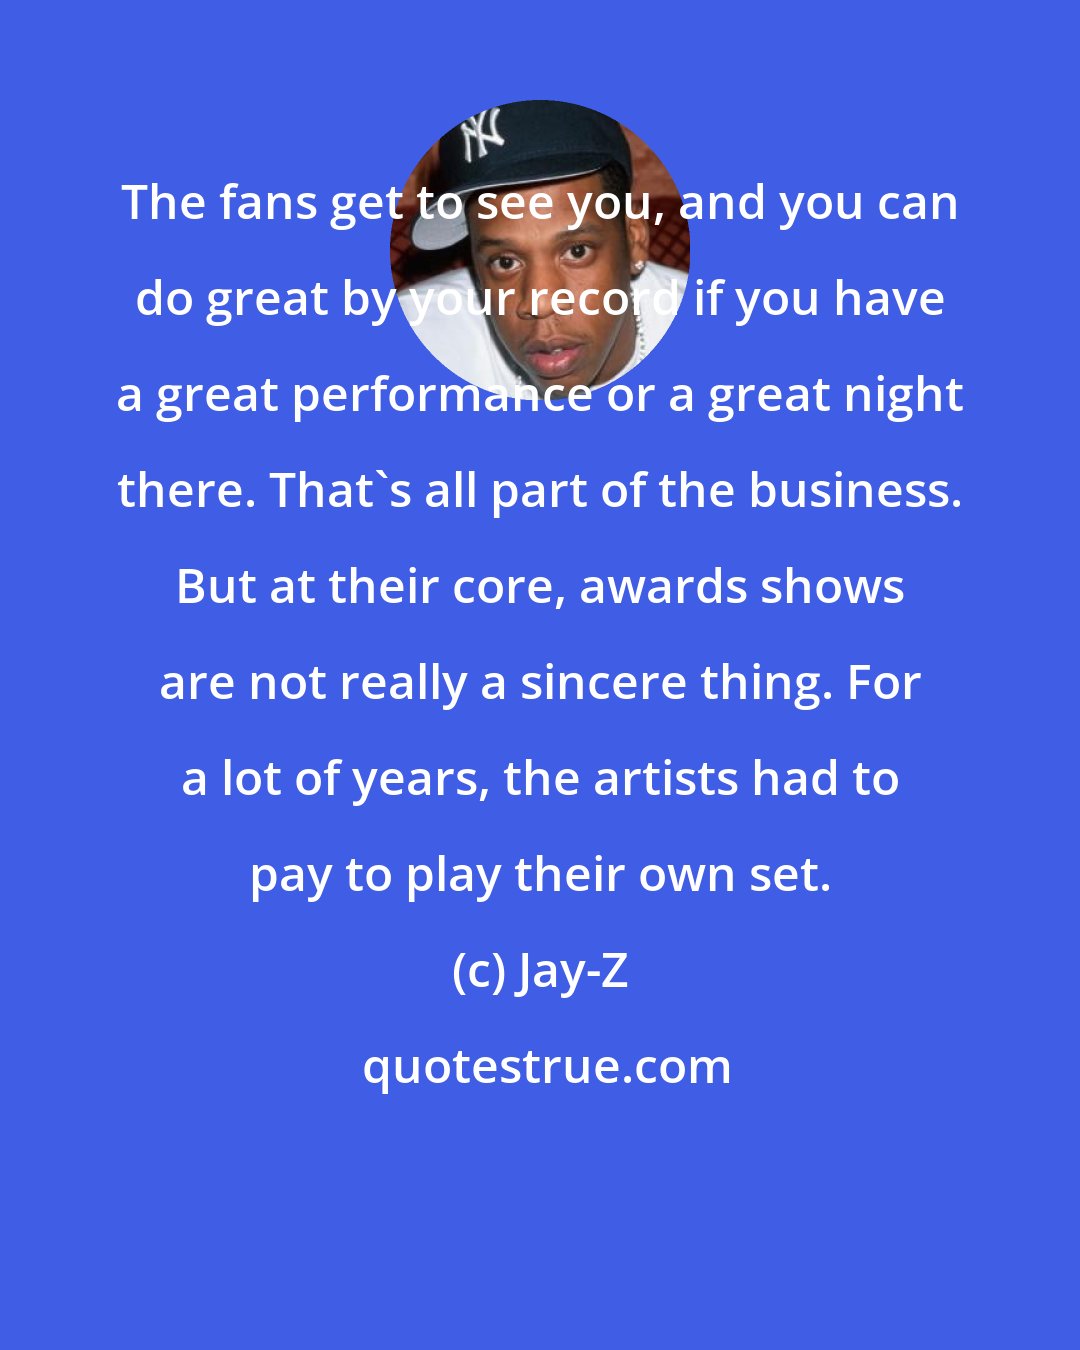 Jay-Z: The fans get to see you, and you can do great by your record if you have a great performance or a great night there. That's all part of the business. But at their core, awards shows are not really a sincere thing. For a lot of years, the artists had to pay to play their own set.